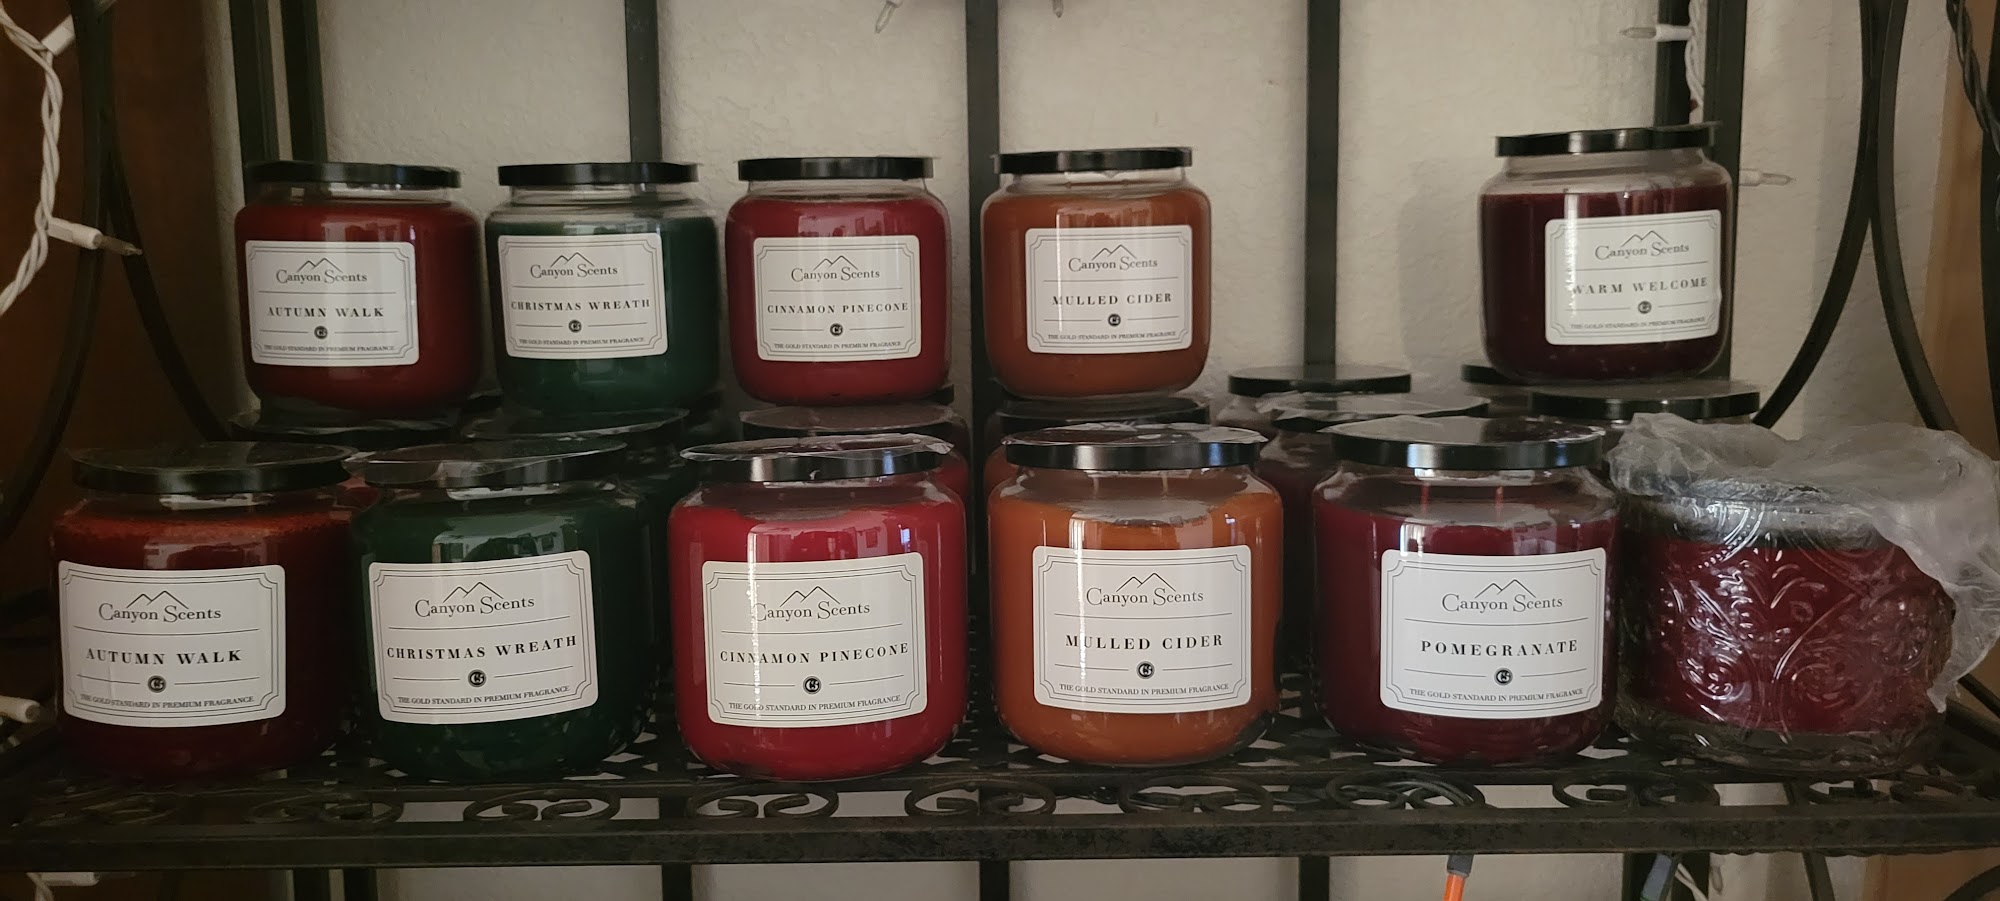 Gold Canyon's Canyon Scents Candles